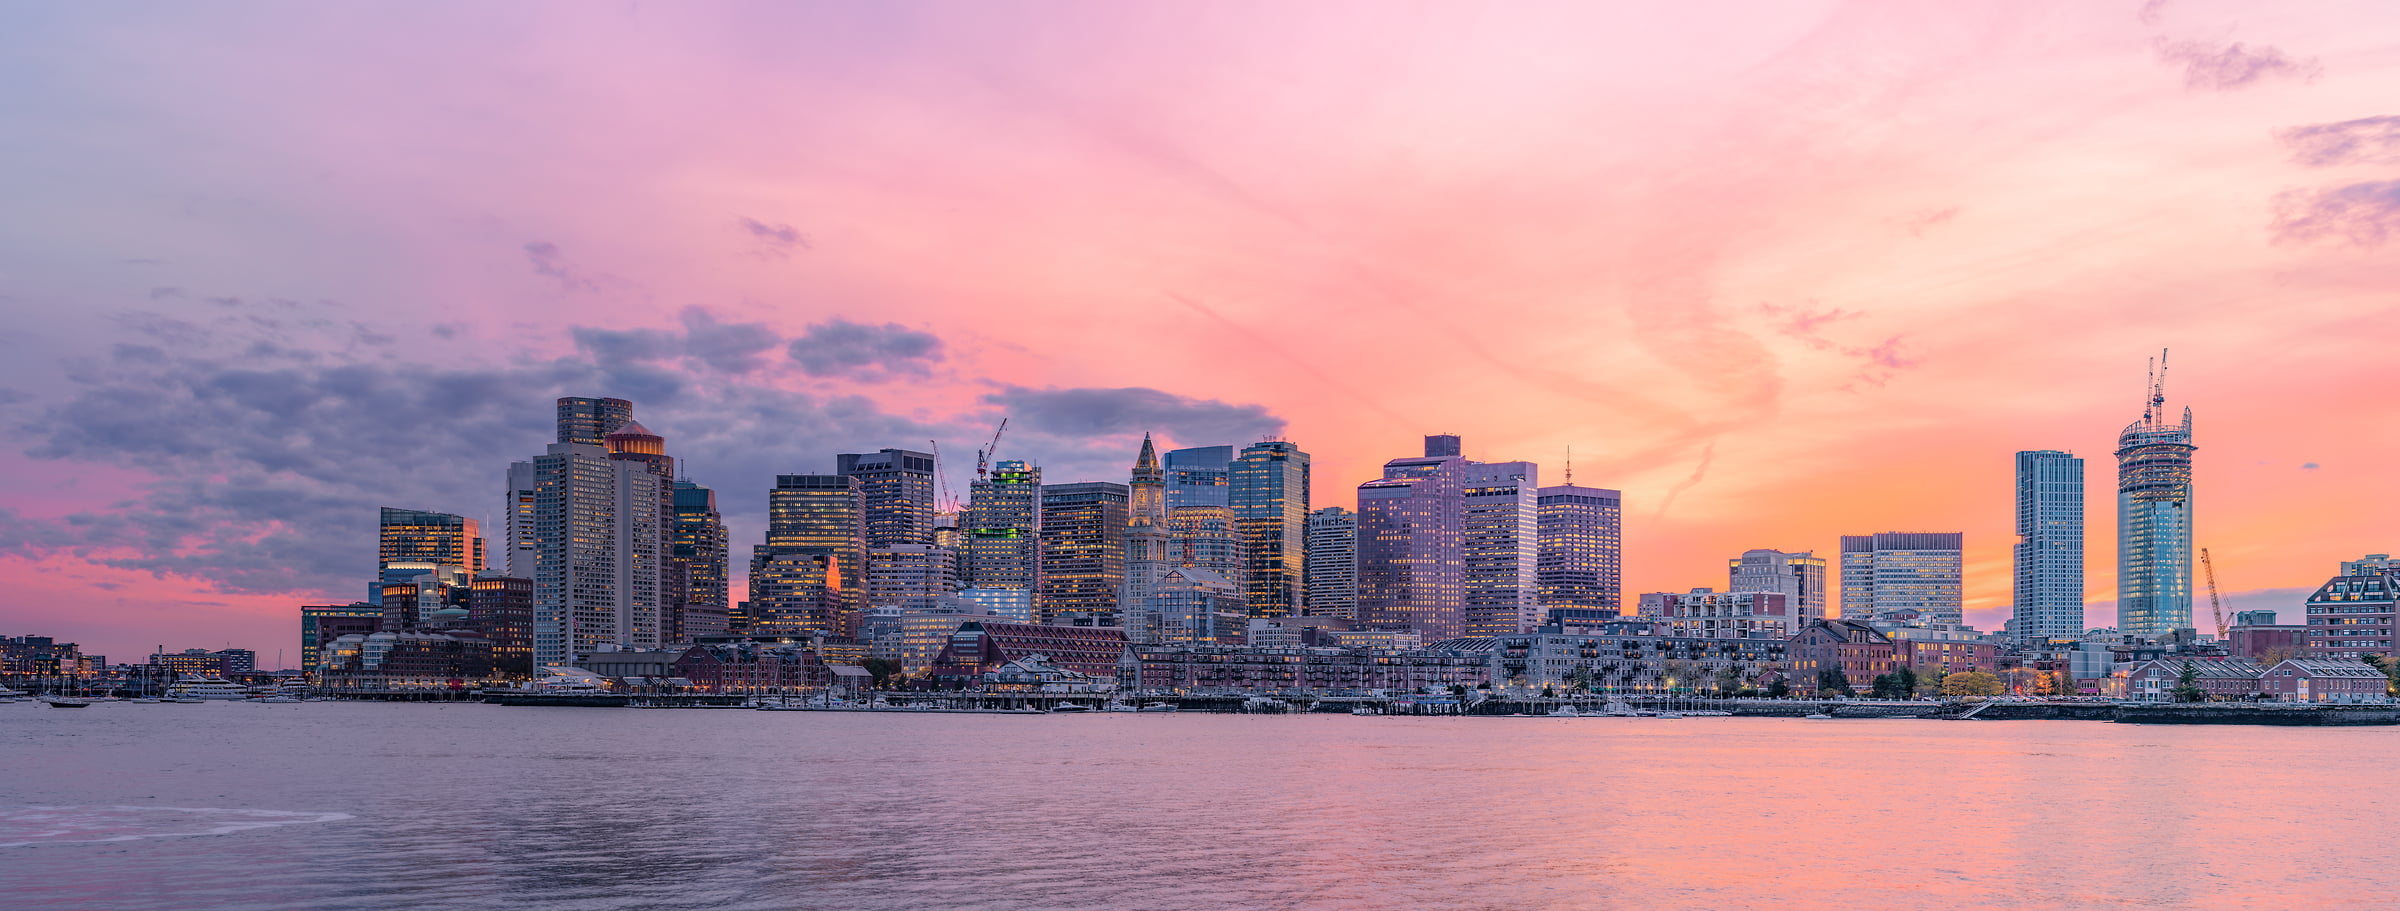 603 megapixels! A very high resolution, large-format VAST photo print of the Boston skyline at sunset; cityscape photograph created by Chris Blake in Boston, Massachusetts